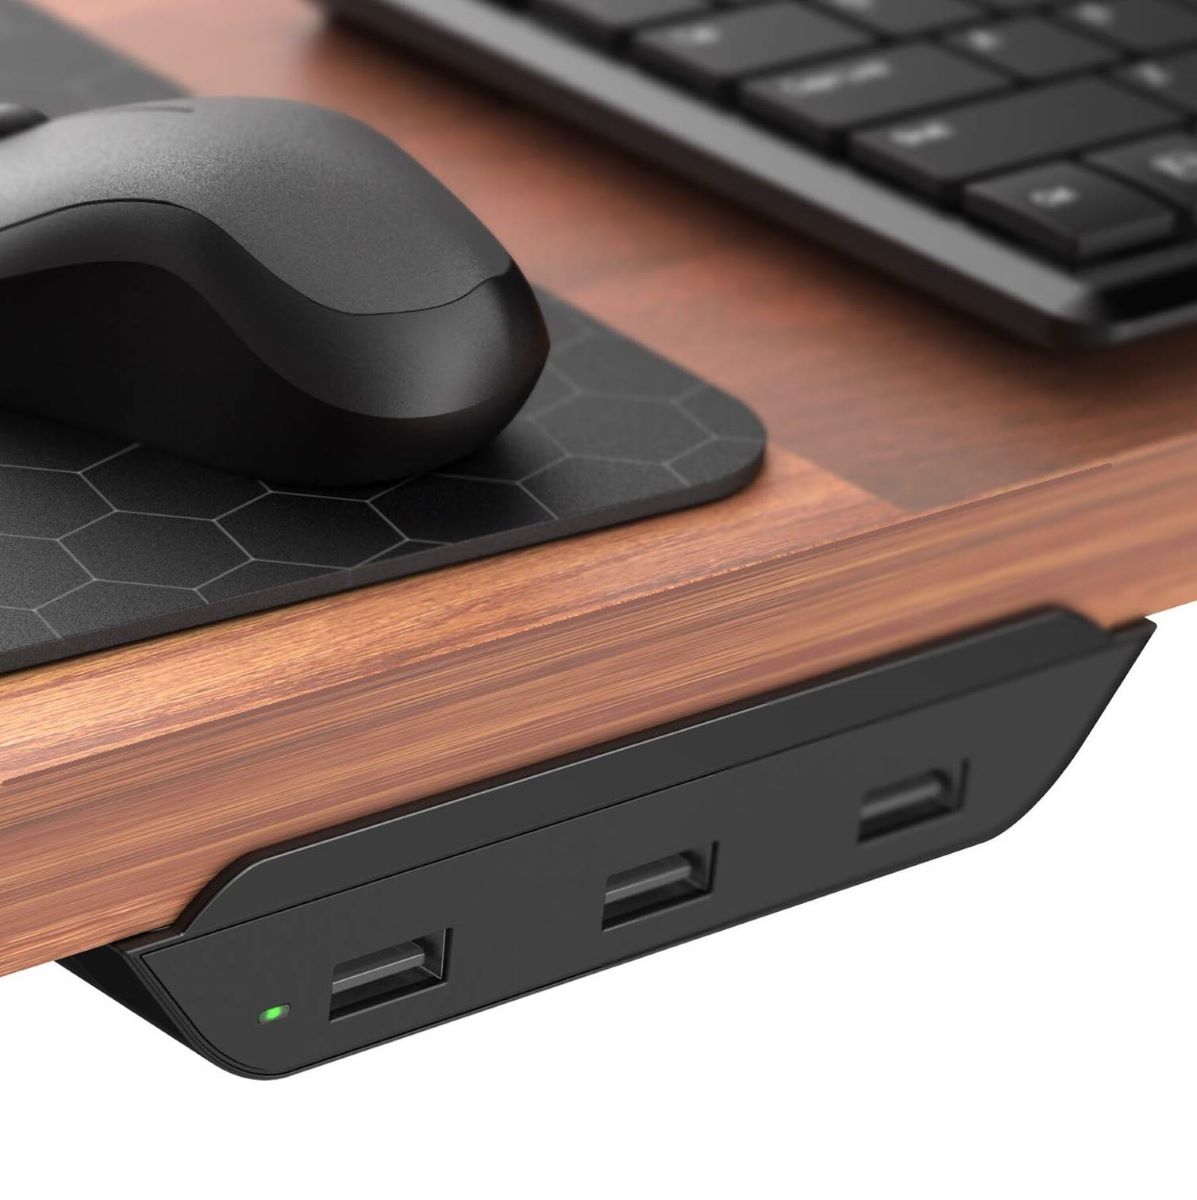 How To Attach A USB Hub To A Desk